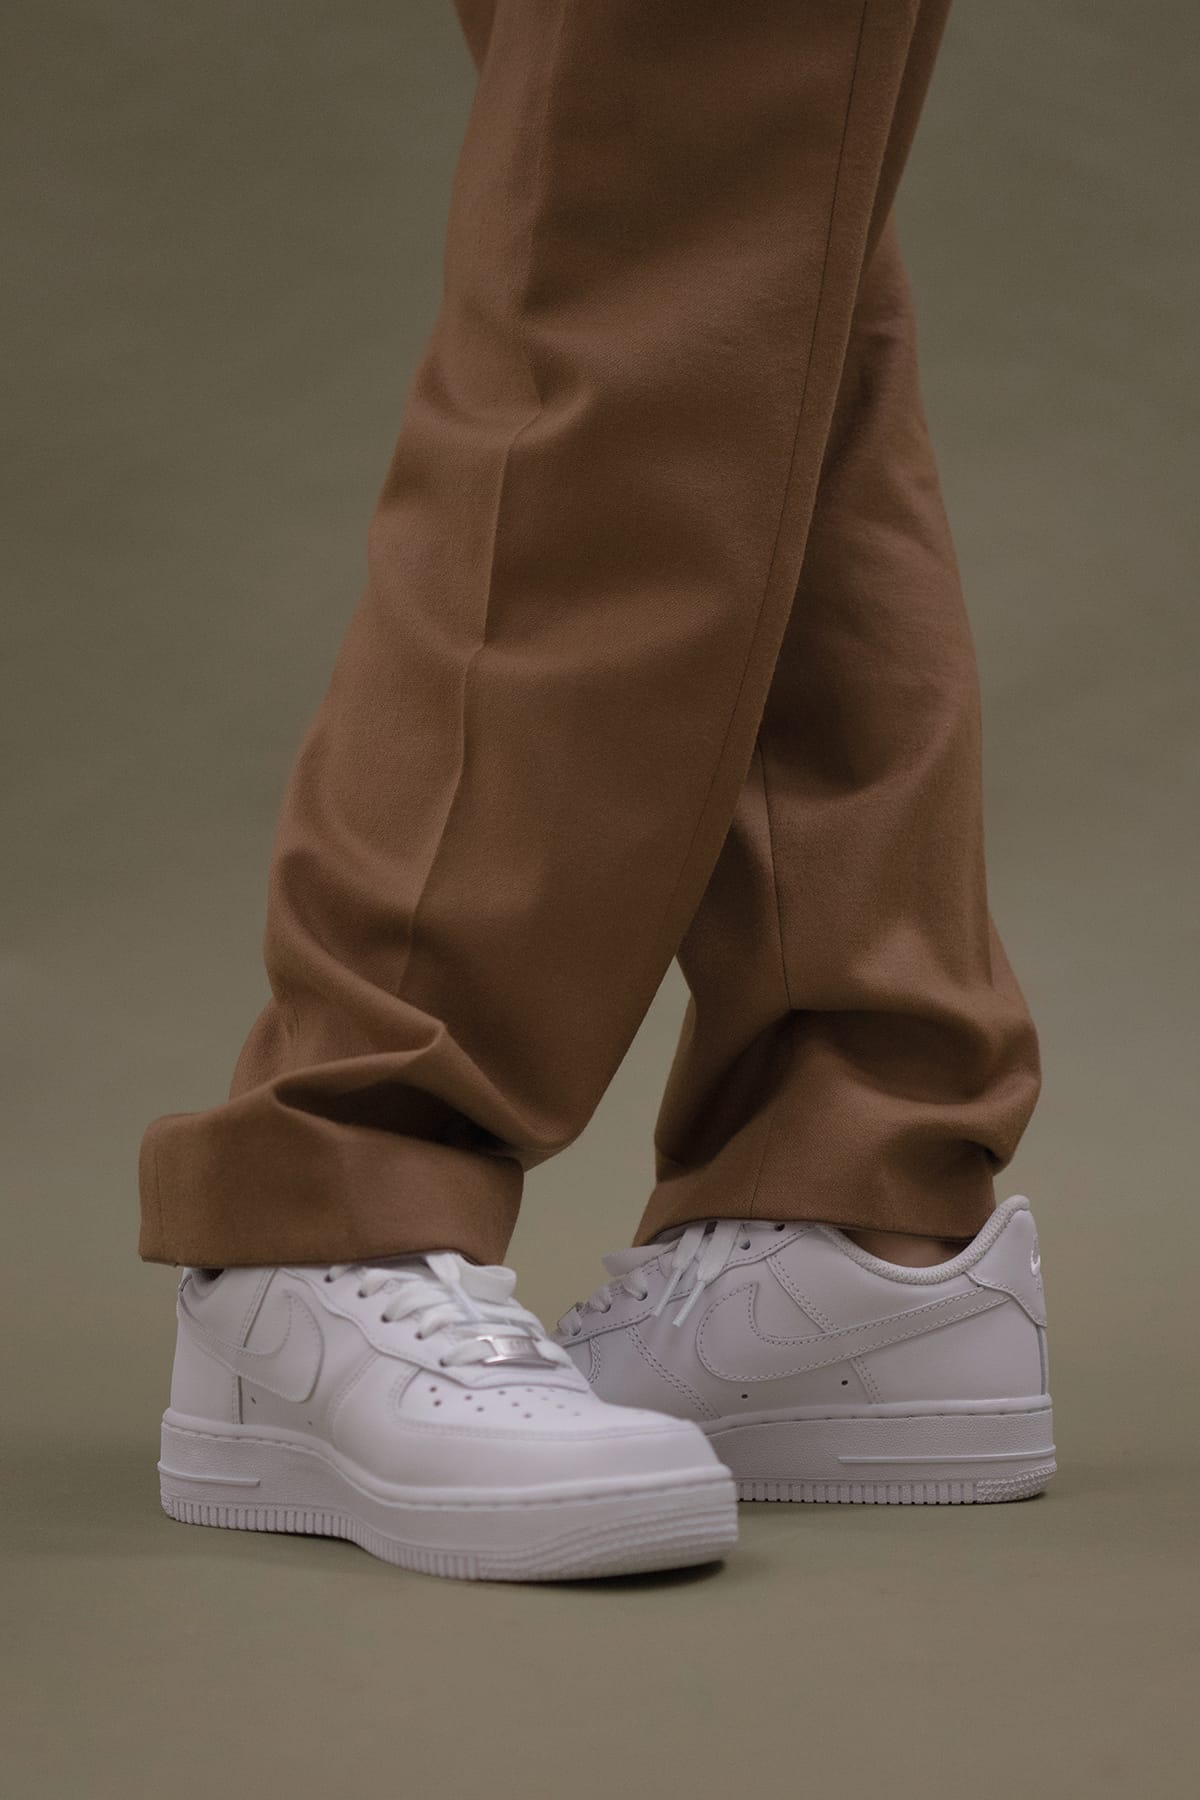 khaki pants with air force ones